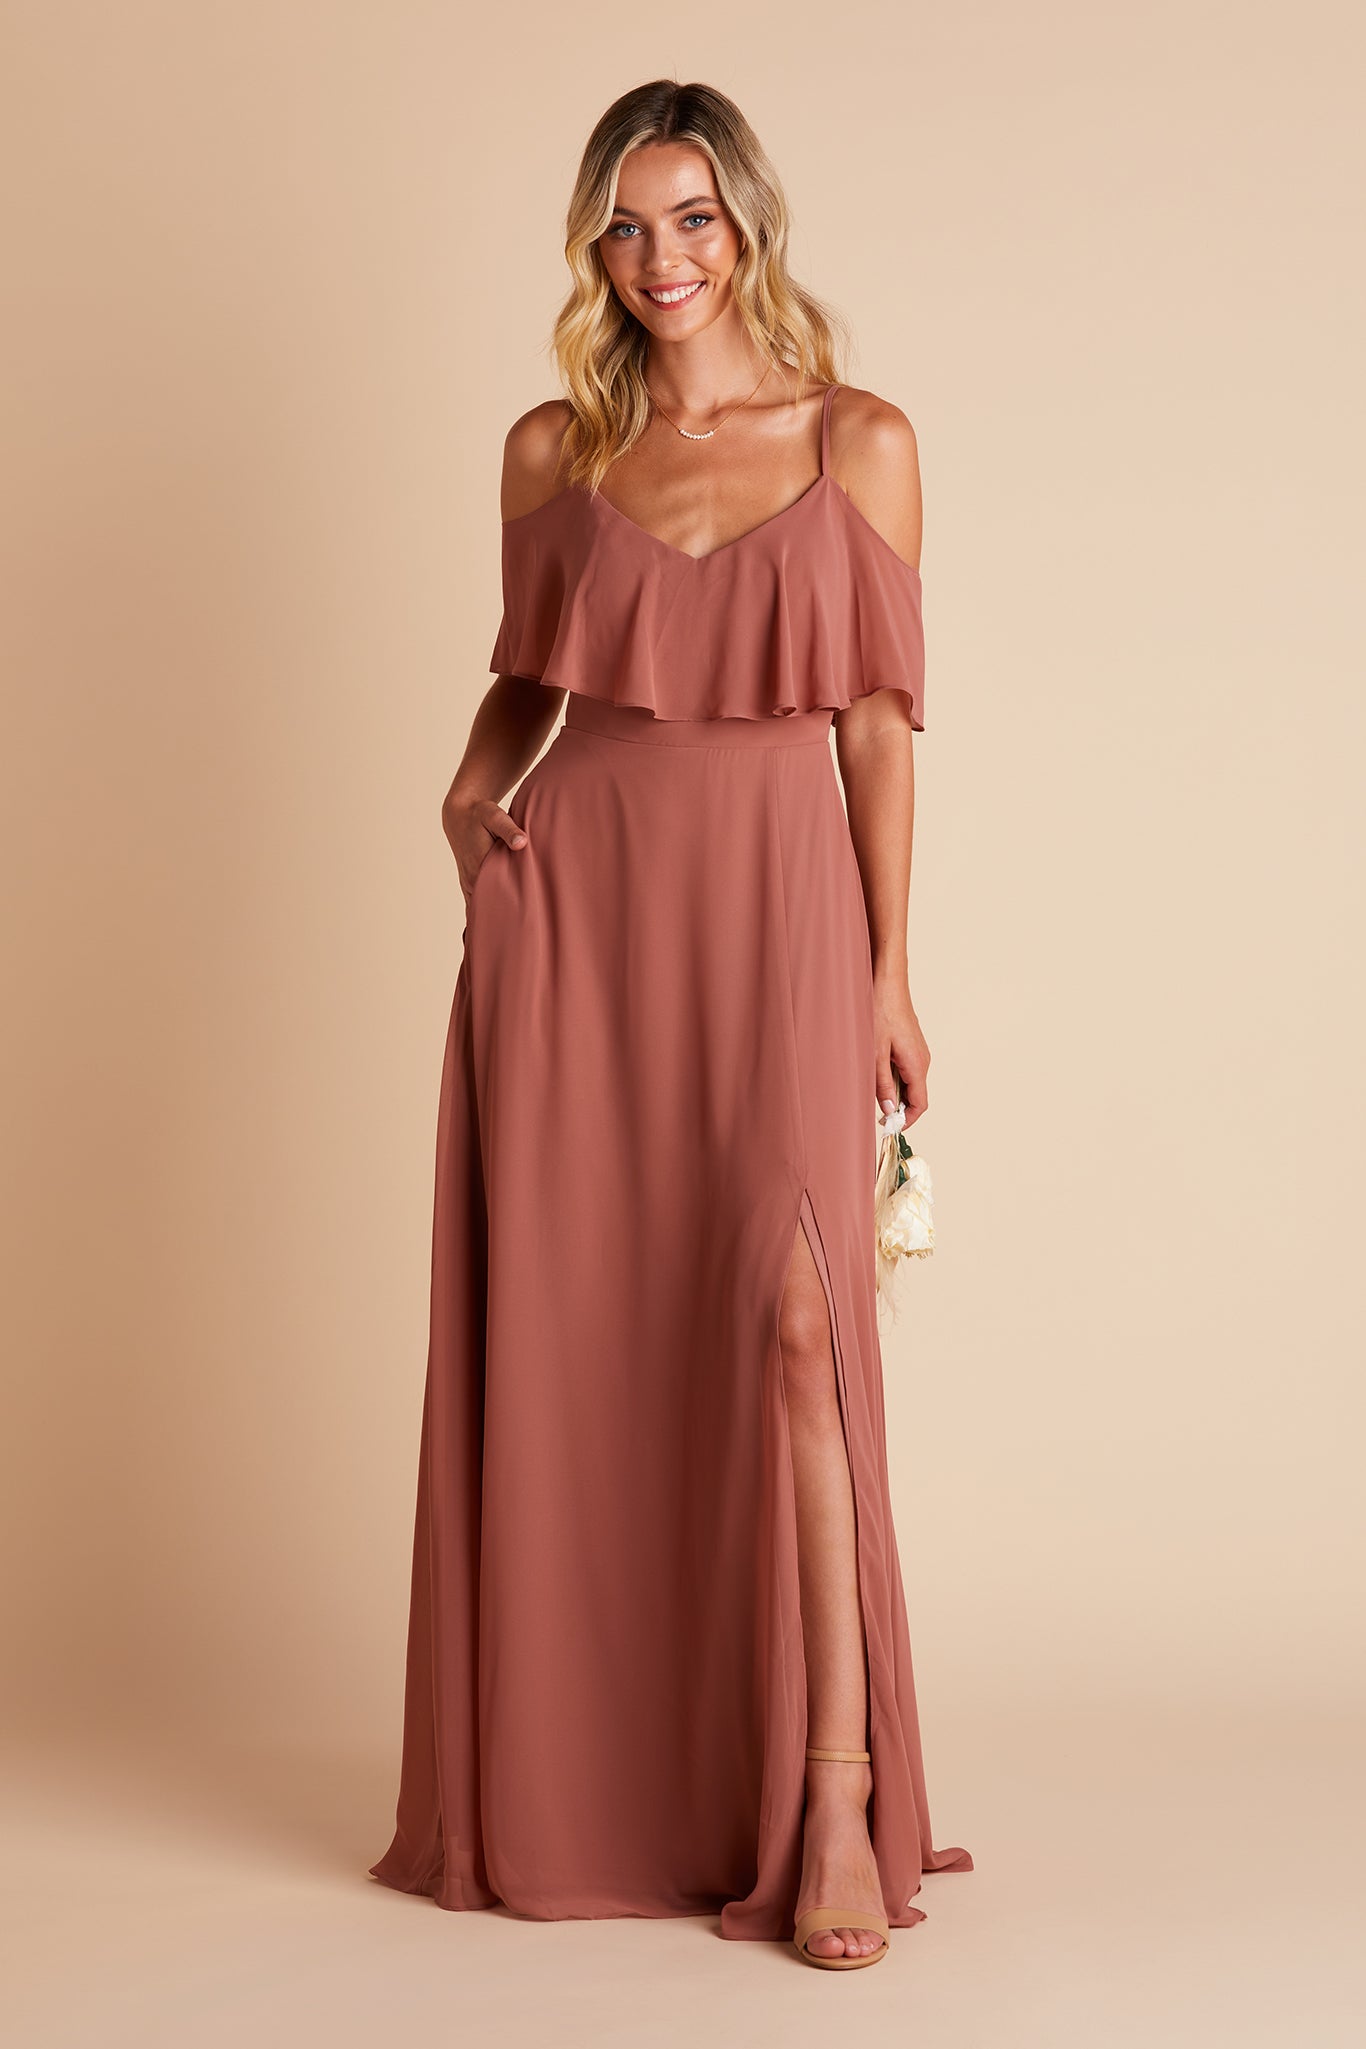 Jane convertible bridesmaid dress with slit in desert rose chiffon by Birdy Grey, front view with hand in pocket